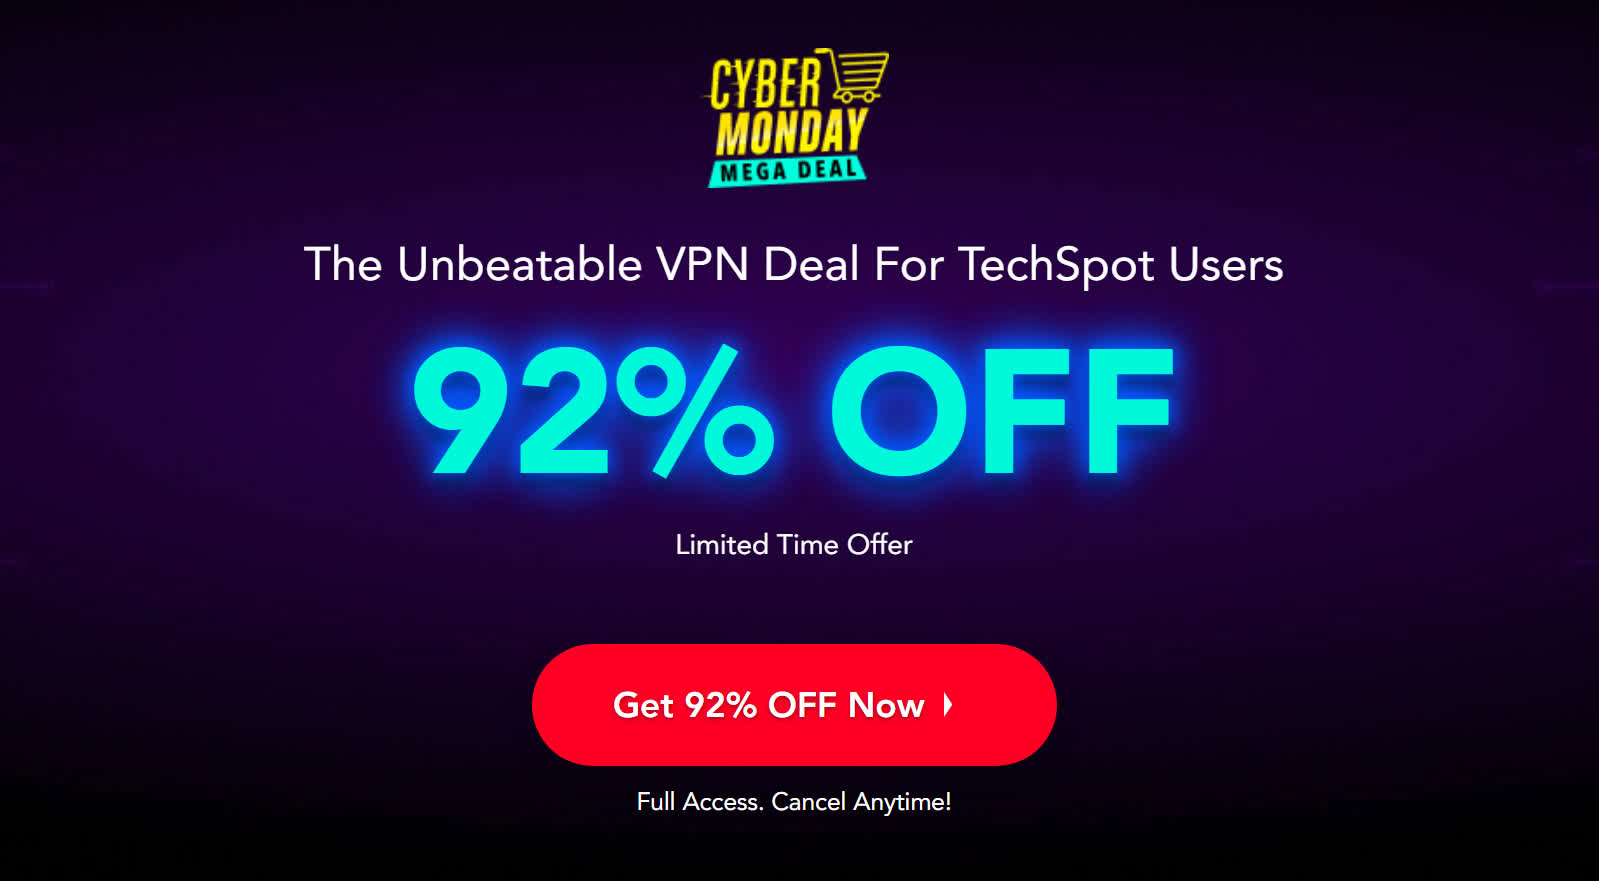 PureVPN goes full blown Cyber Week with 92% off discount